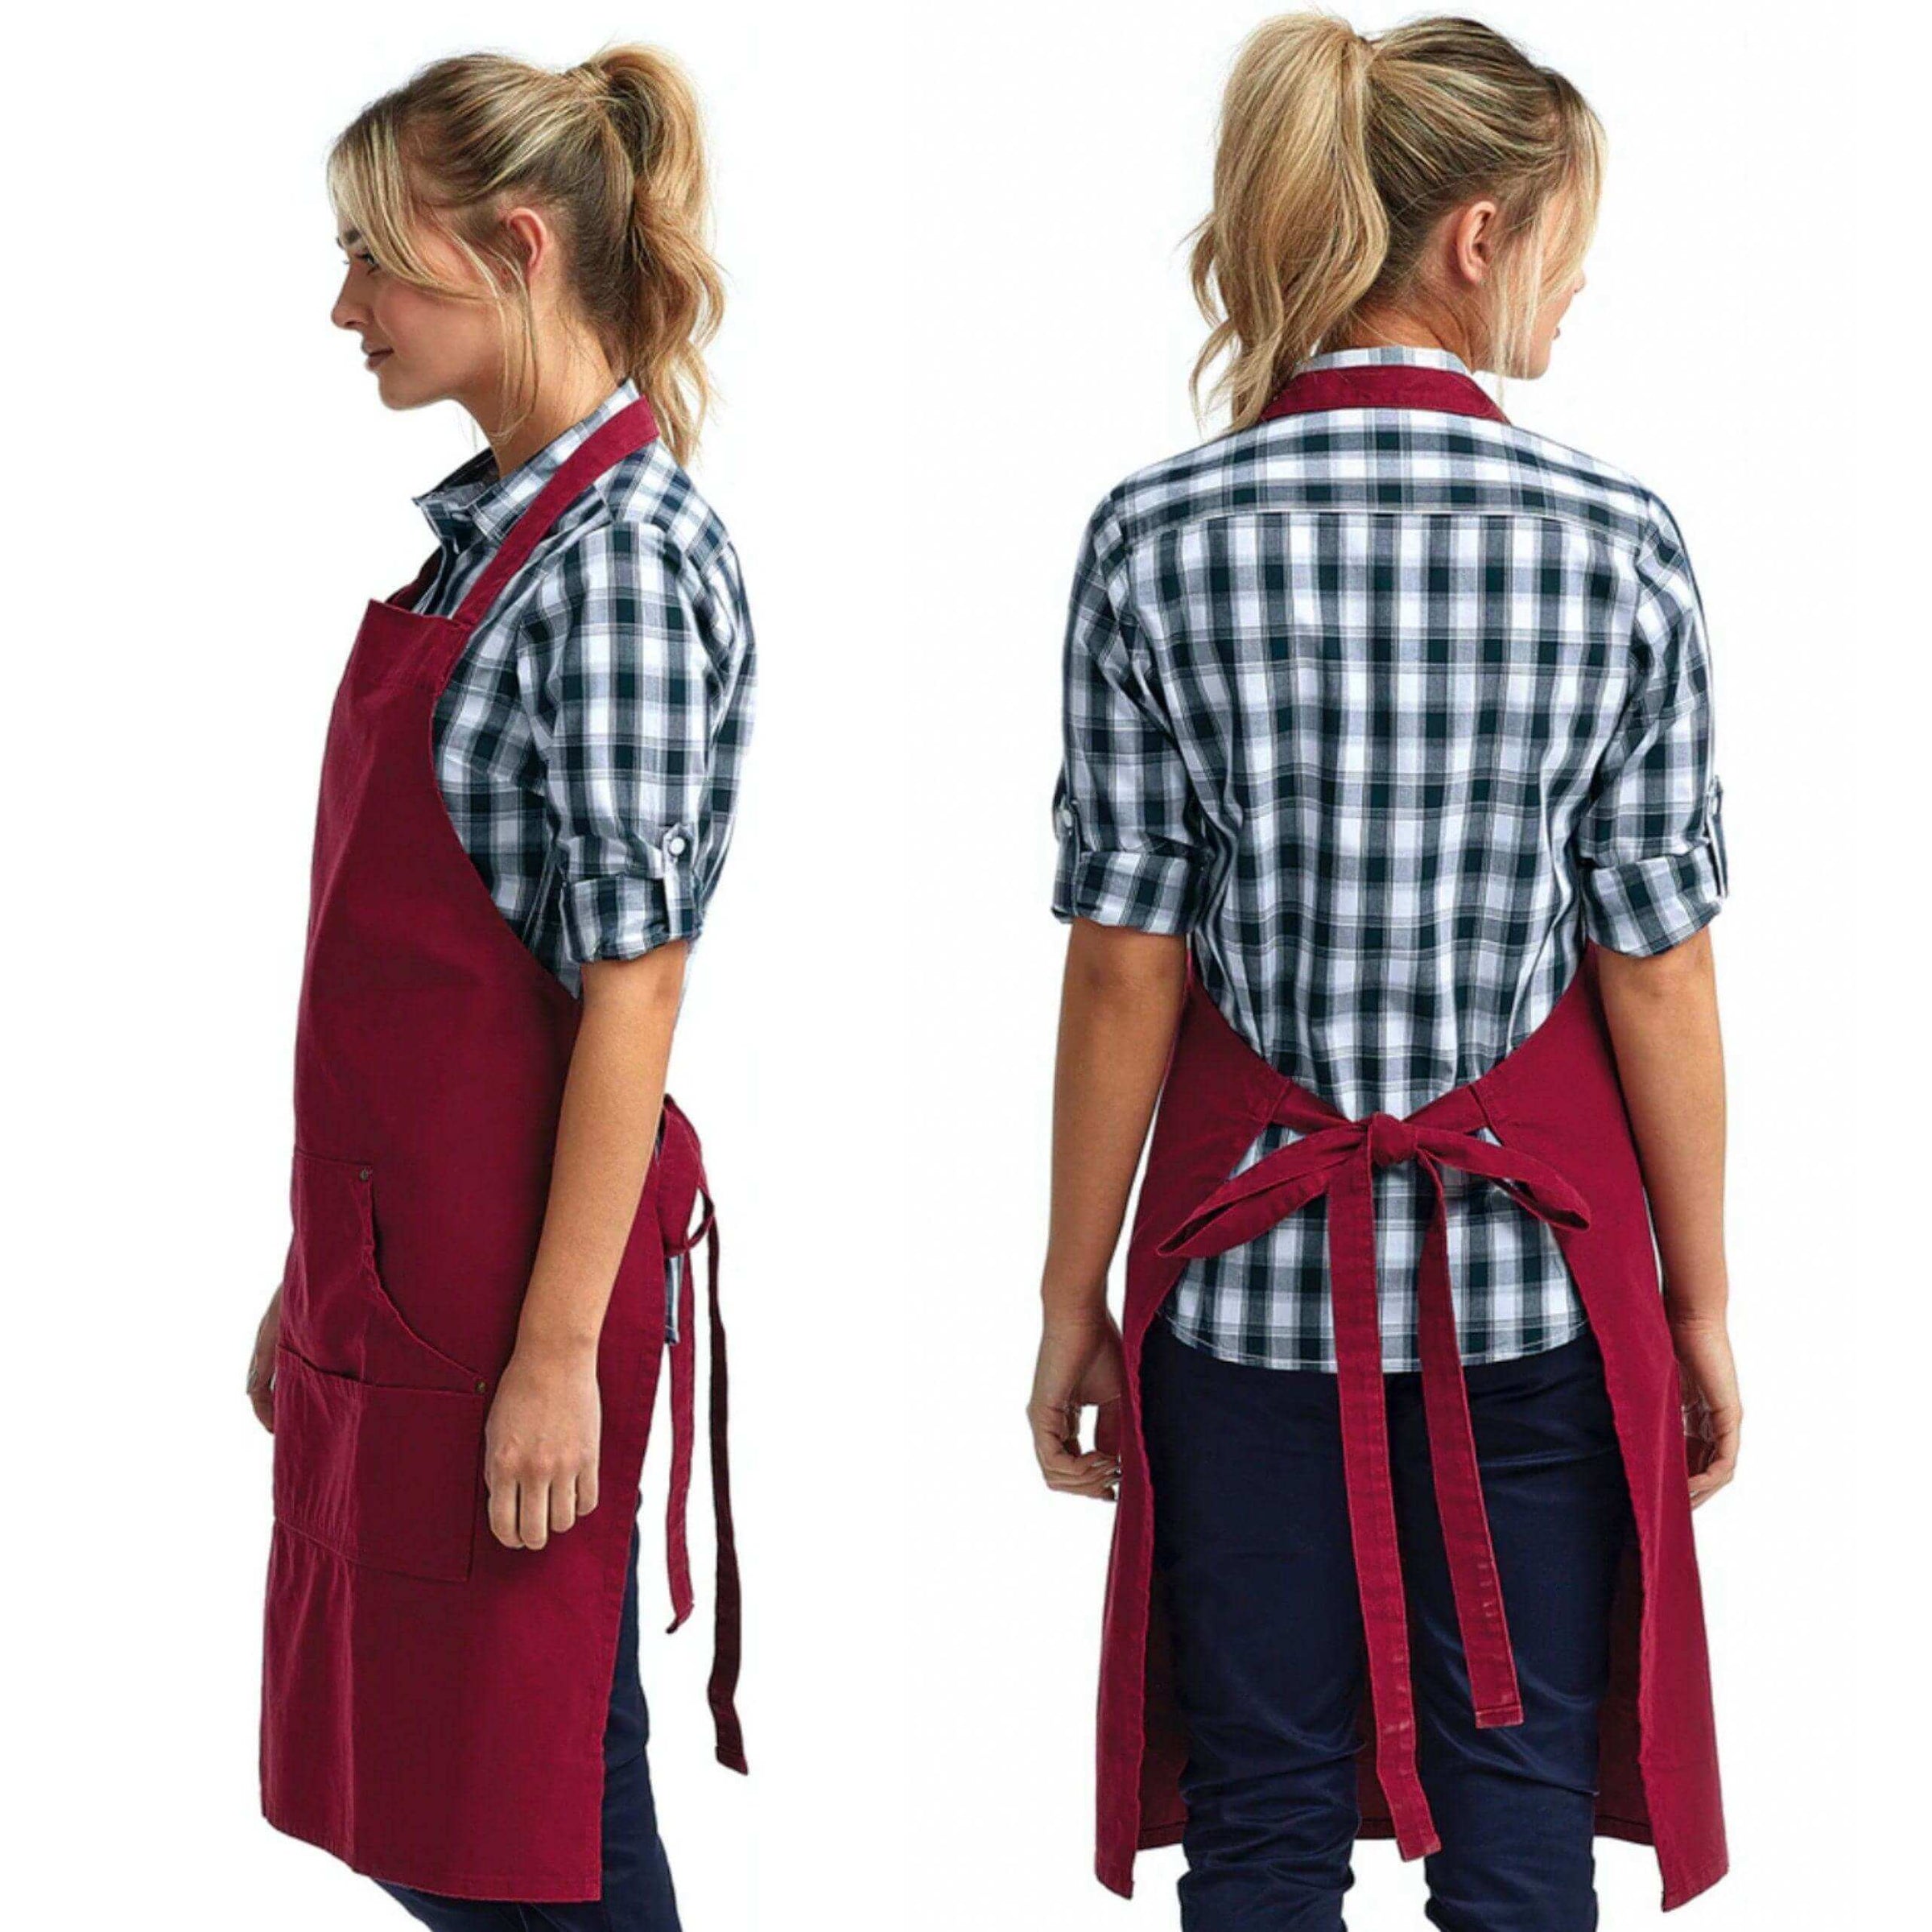 Funny Kitchen Apron With Pockets 34" L x 28"W- My Cooking Is So Fabulous Even The Smoke Detector Cheers Me On - Winks Design Studio,LLC